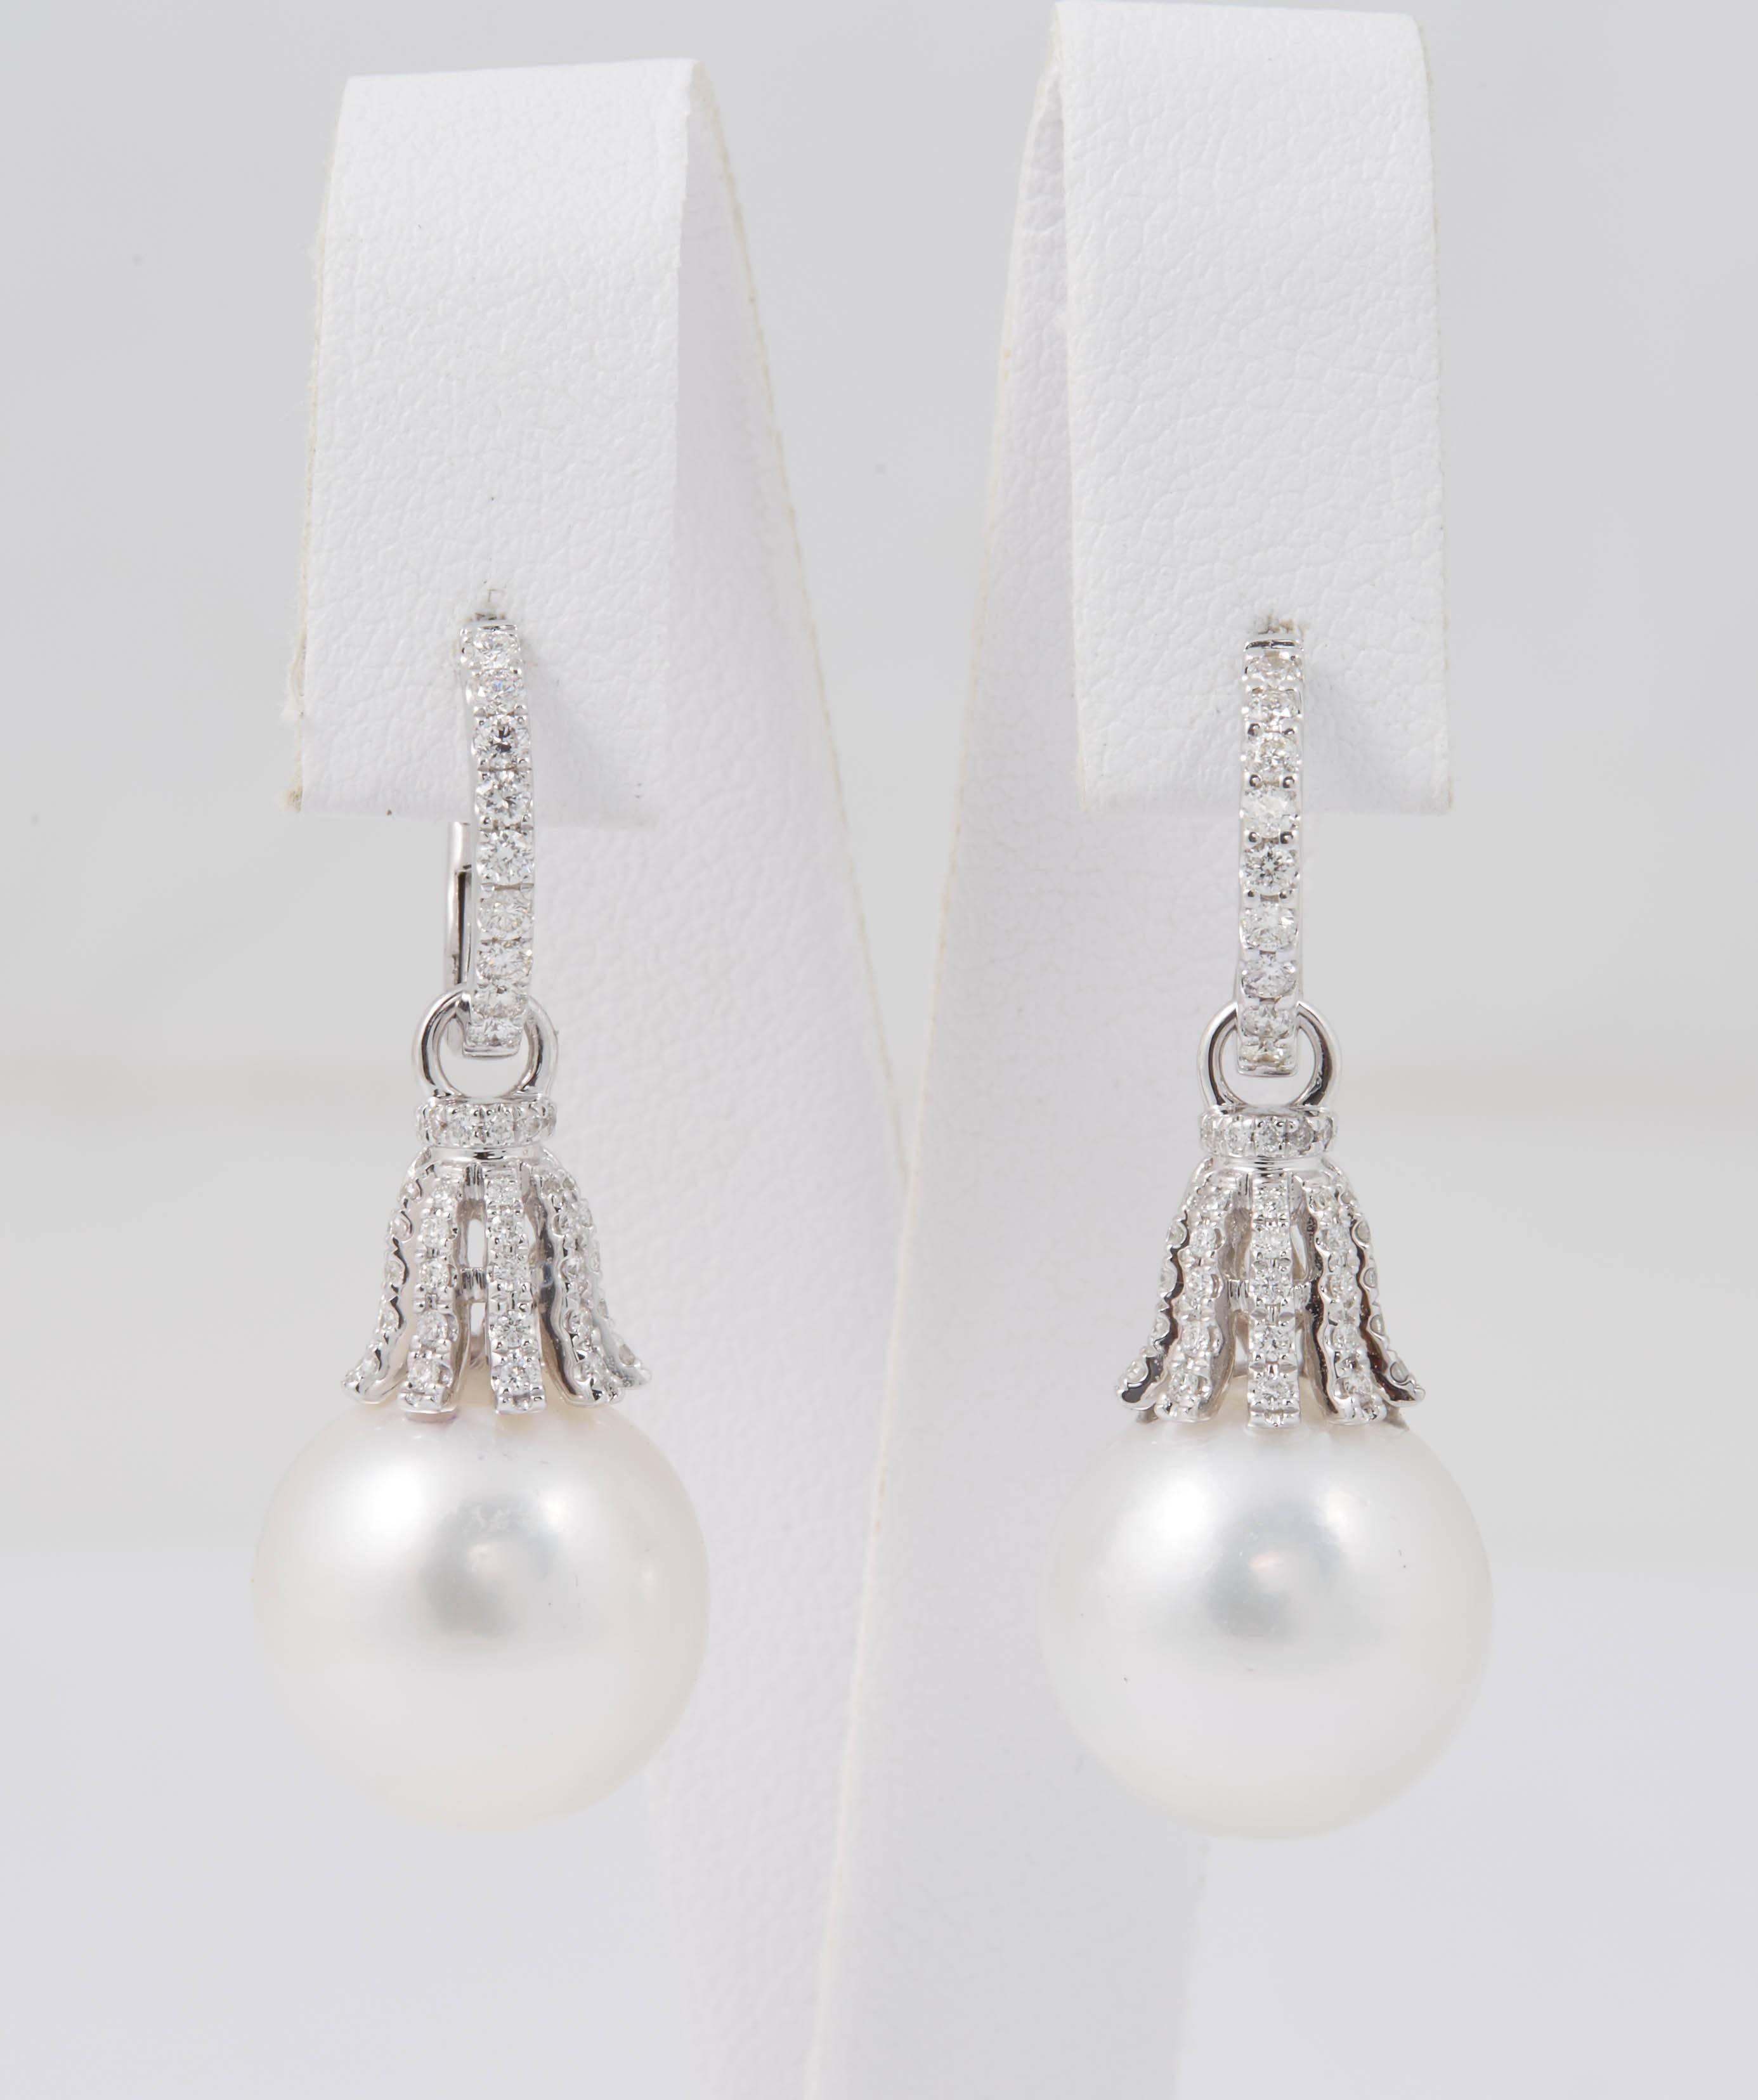 18K white gold
Diamonds: 0.60 Cts
South Sea Pearls: 13-14 MM